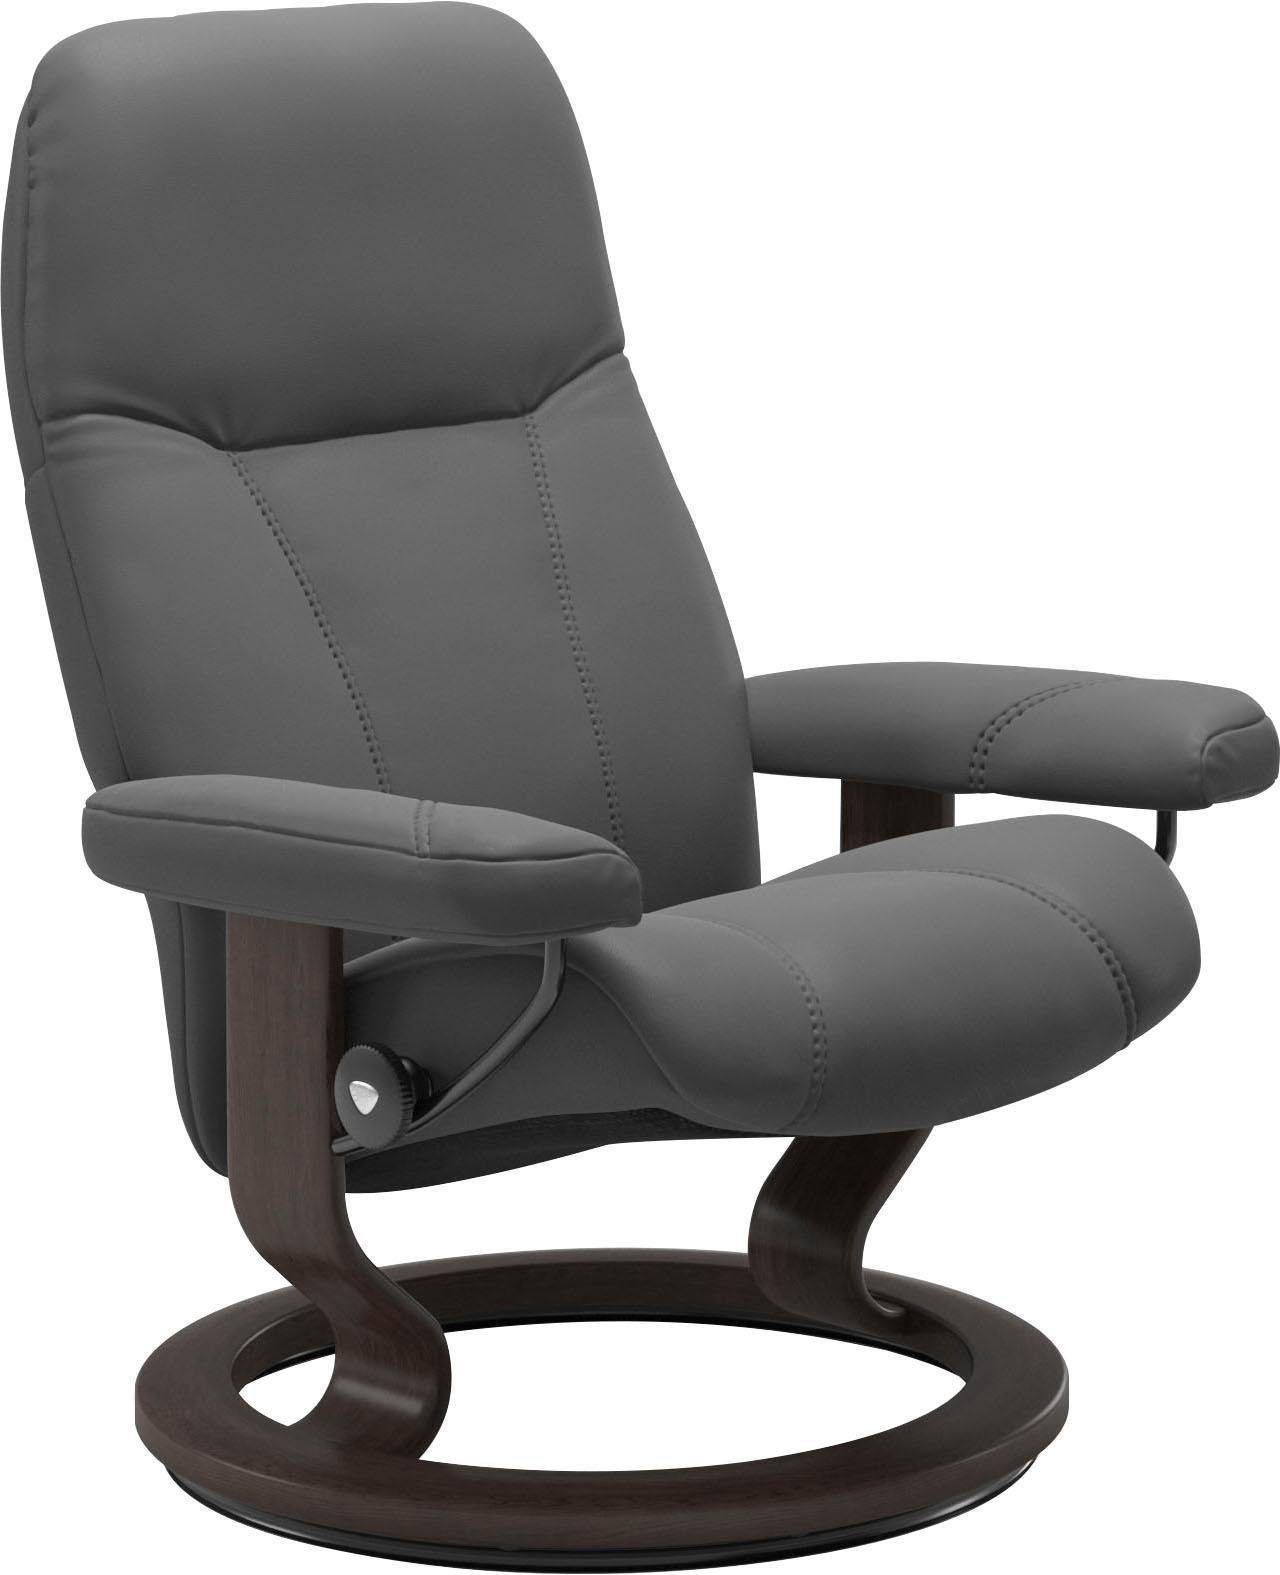 Stressless® Relaxsessel Consul, mit Classic Gestell L, Base, Wenge Größe